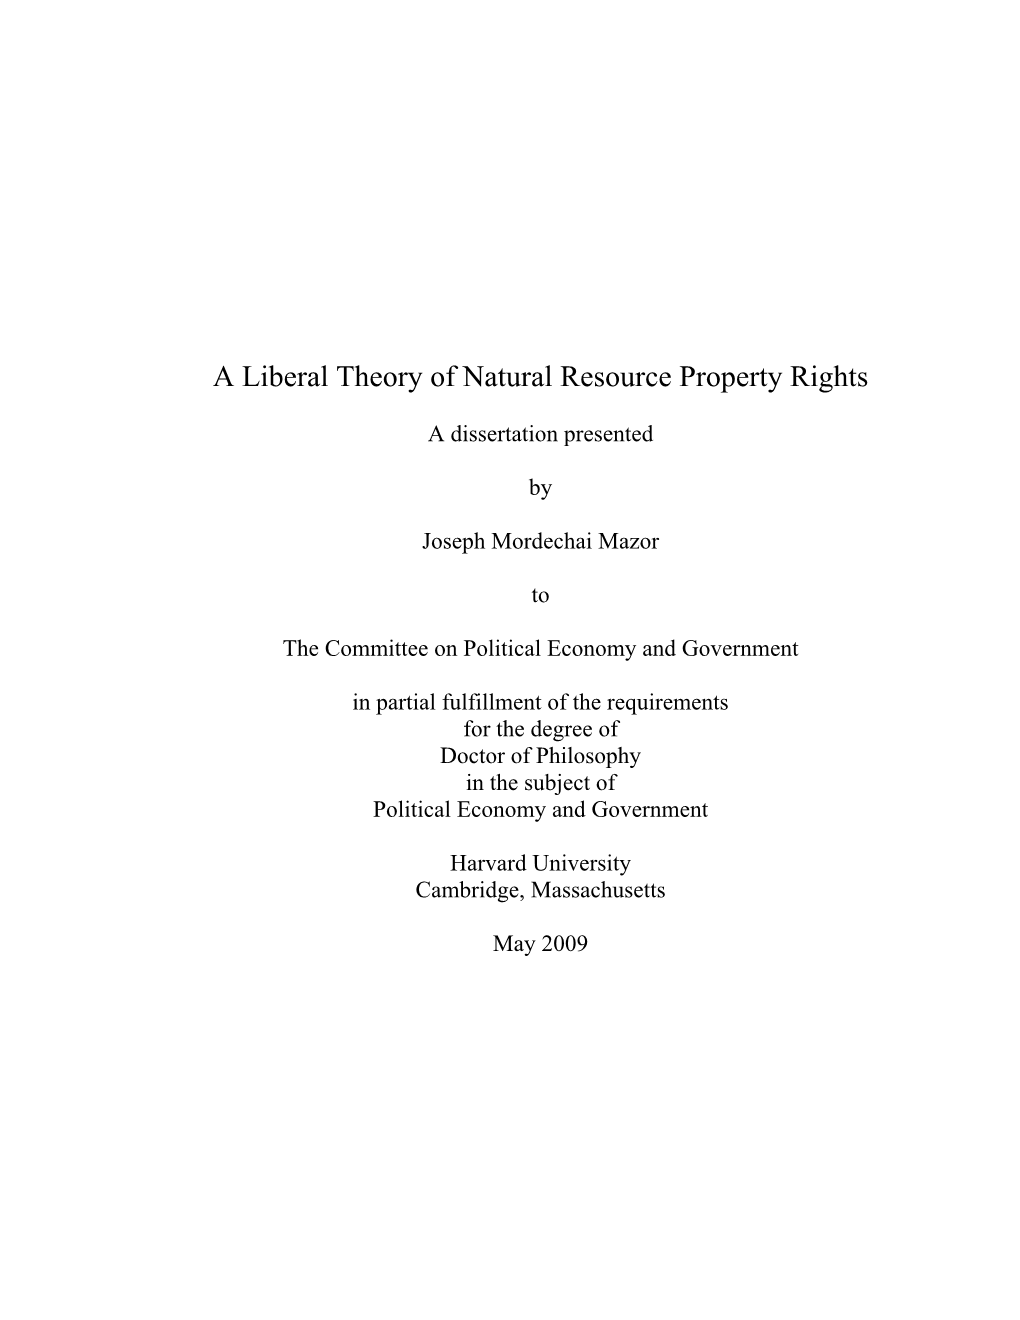 A Liberal Theory of Natural Resource Property Rights